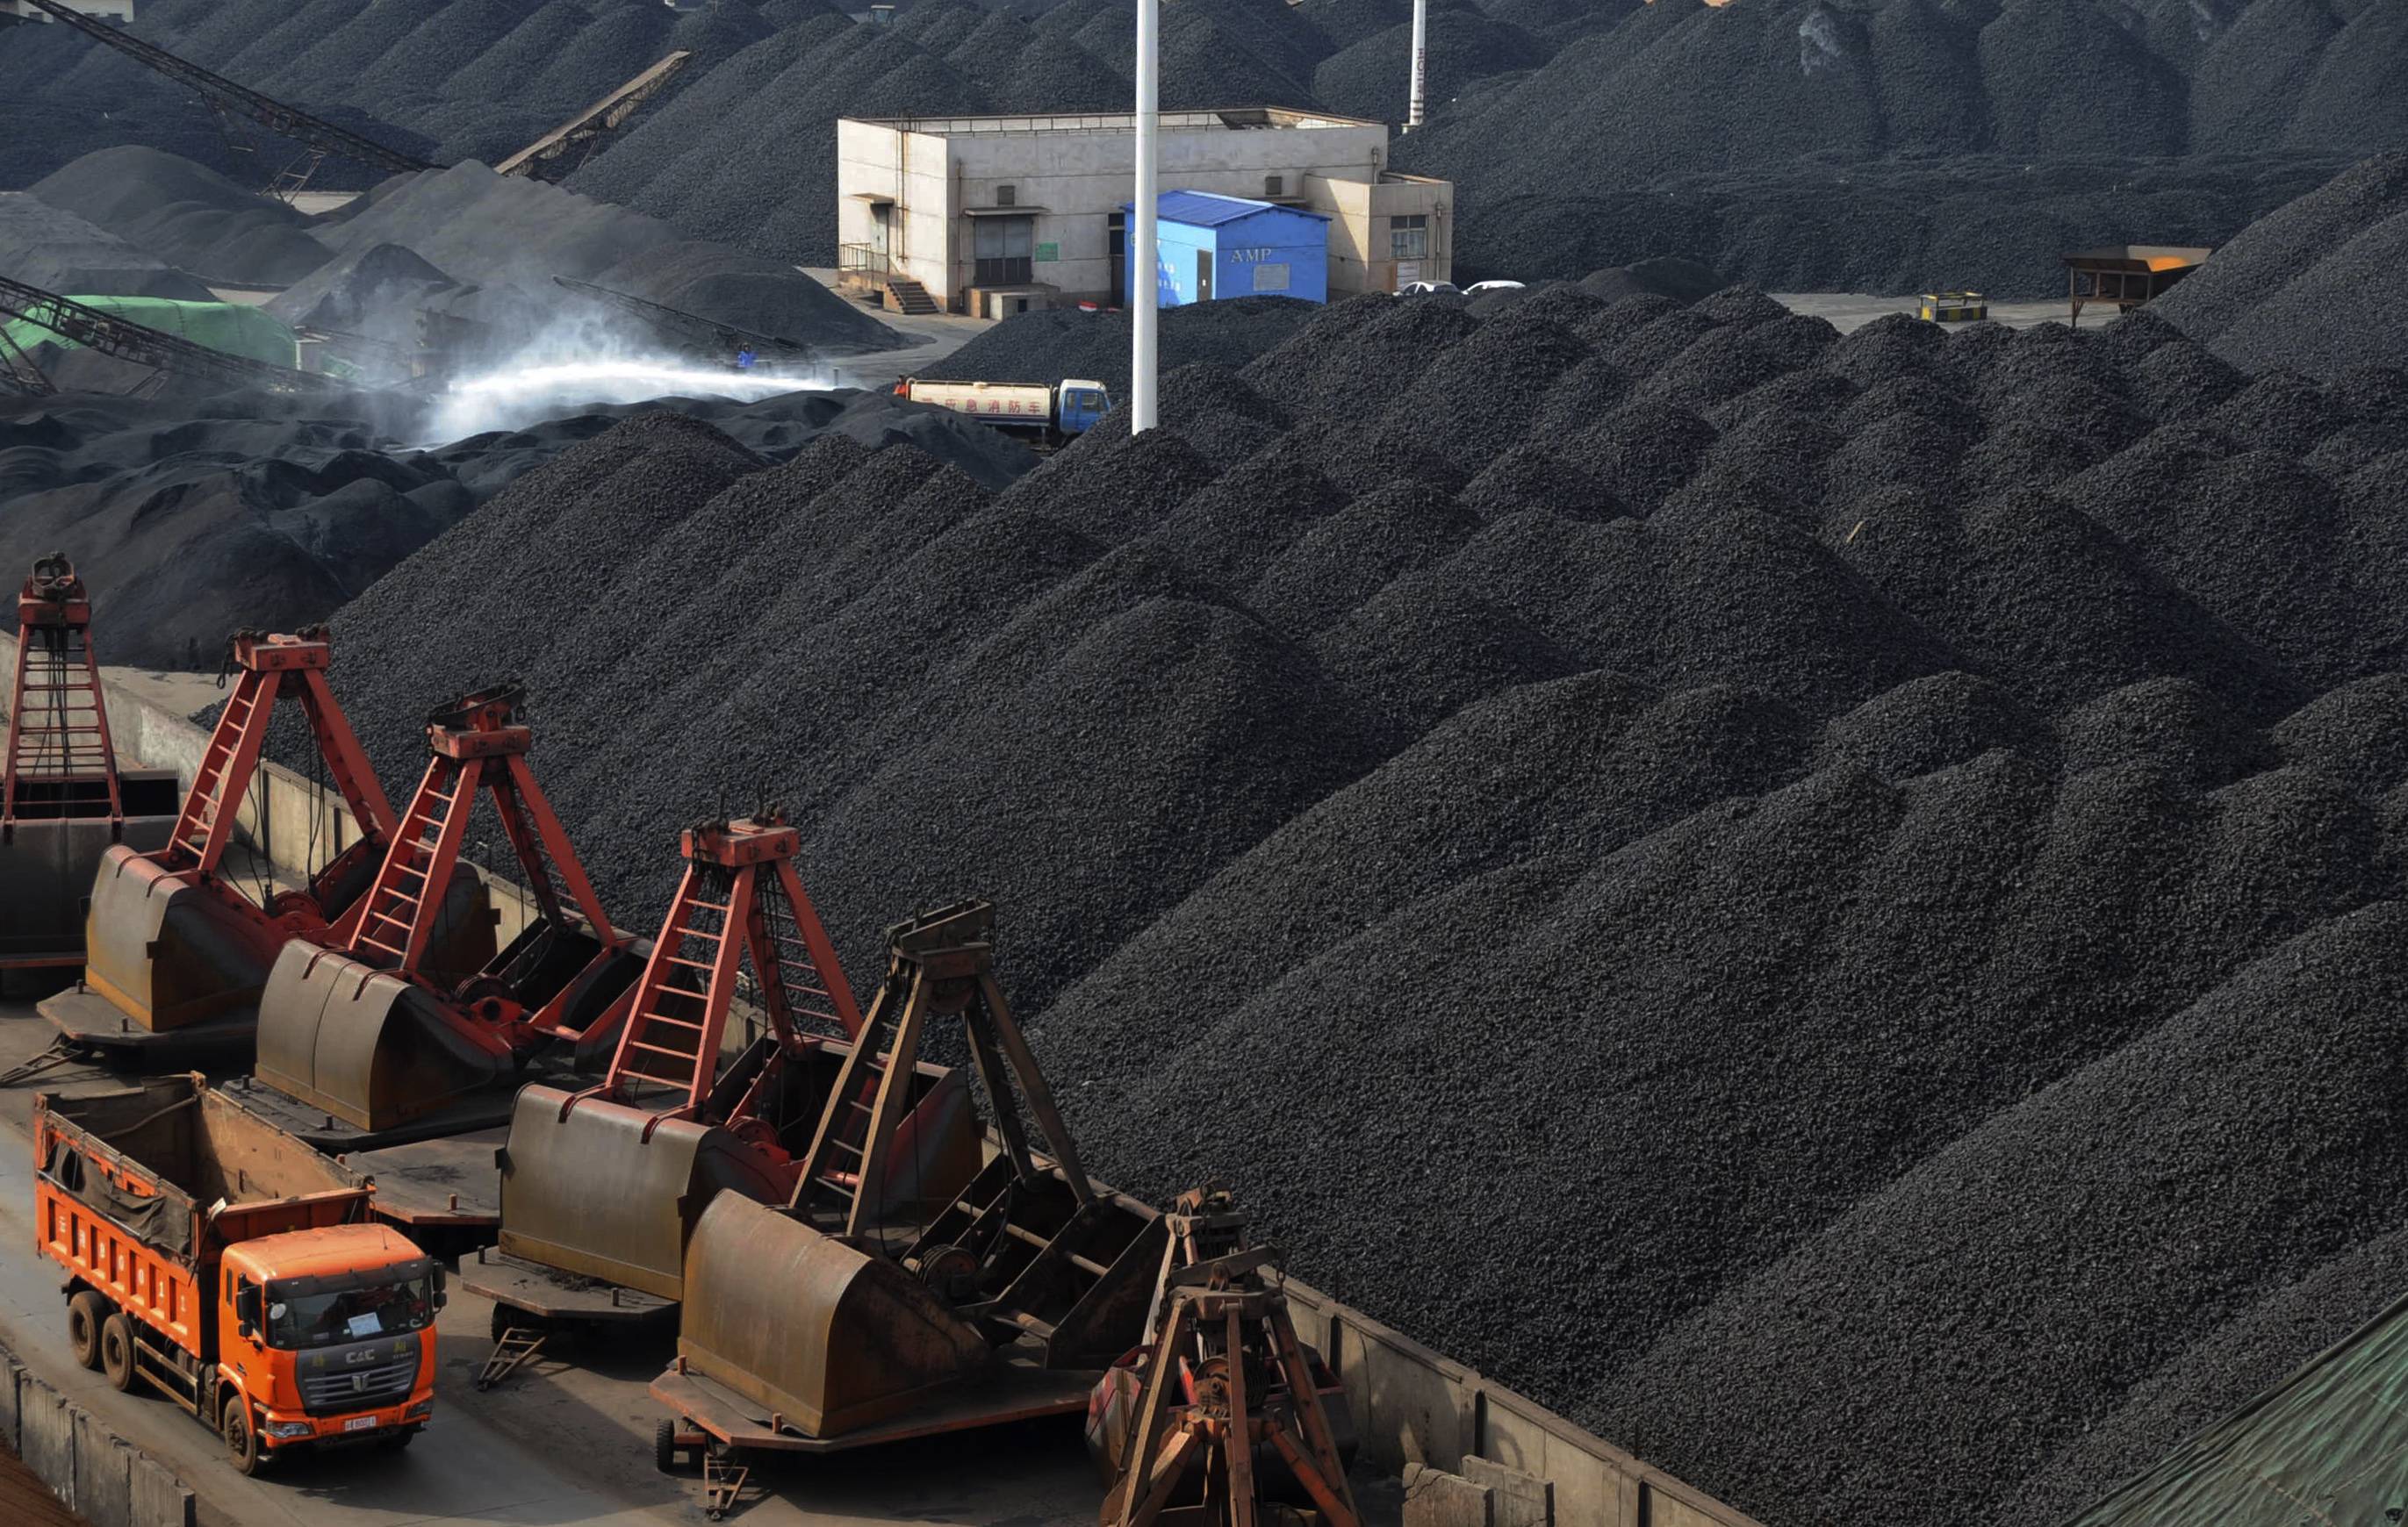 Trucks haul mountains of coal in China as imports of the material surged in July although most in the trade doubt it can be sustained. Photo: Reuters 